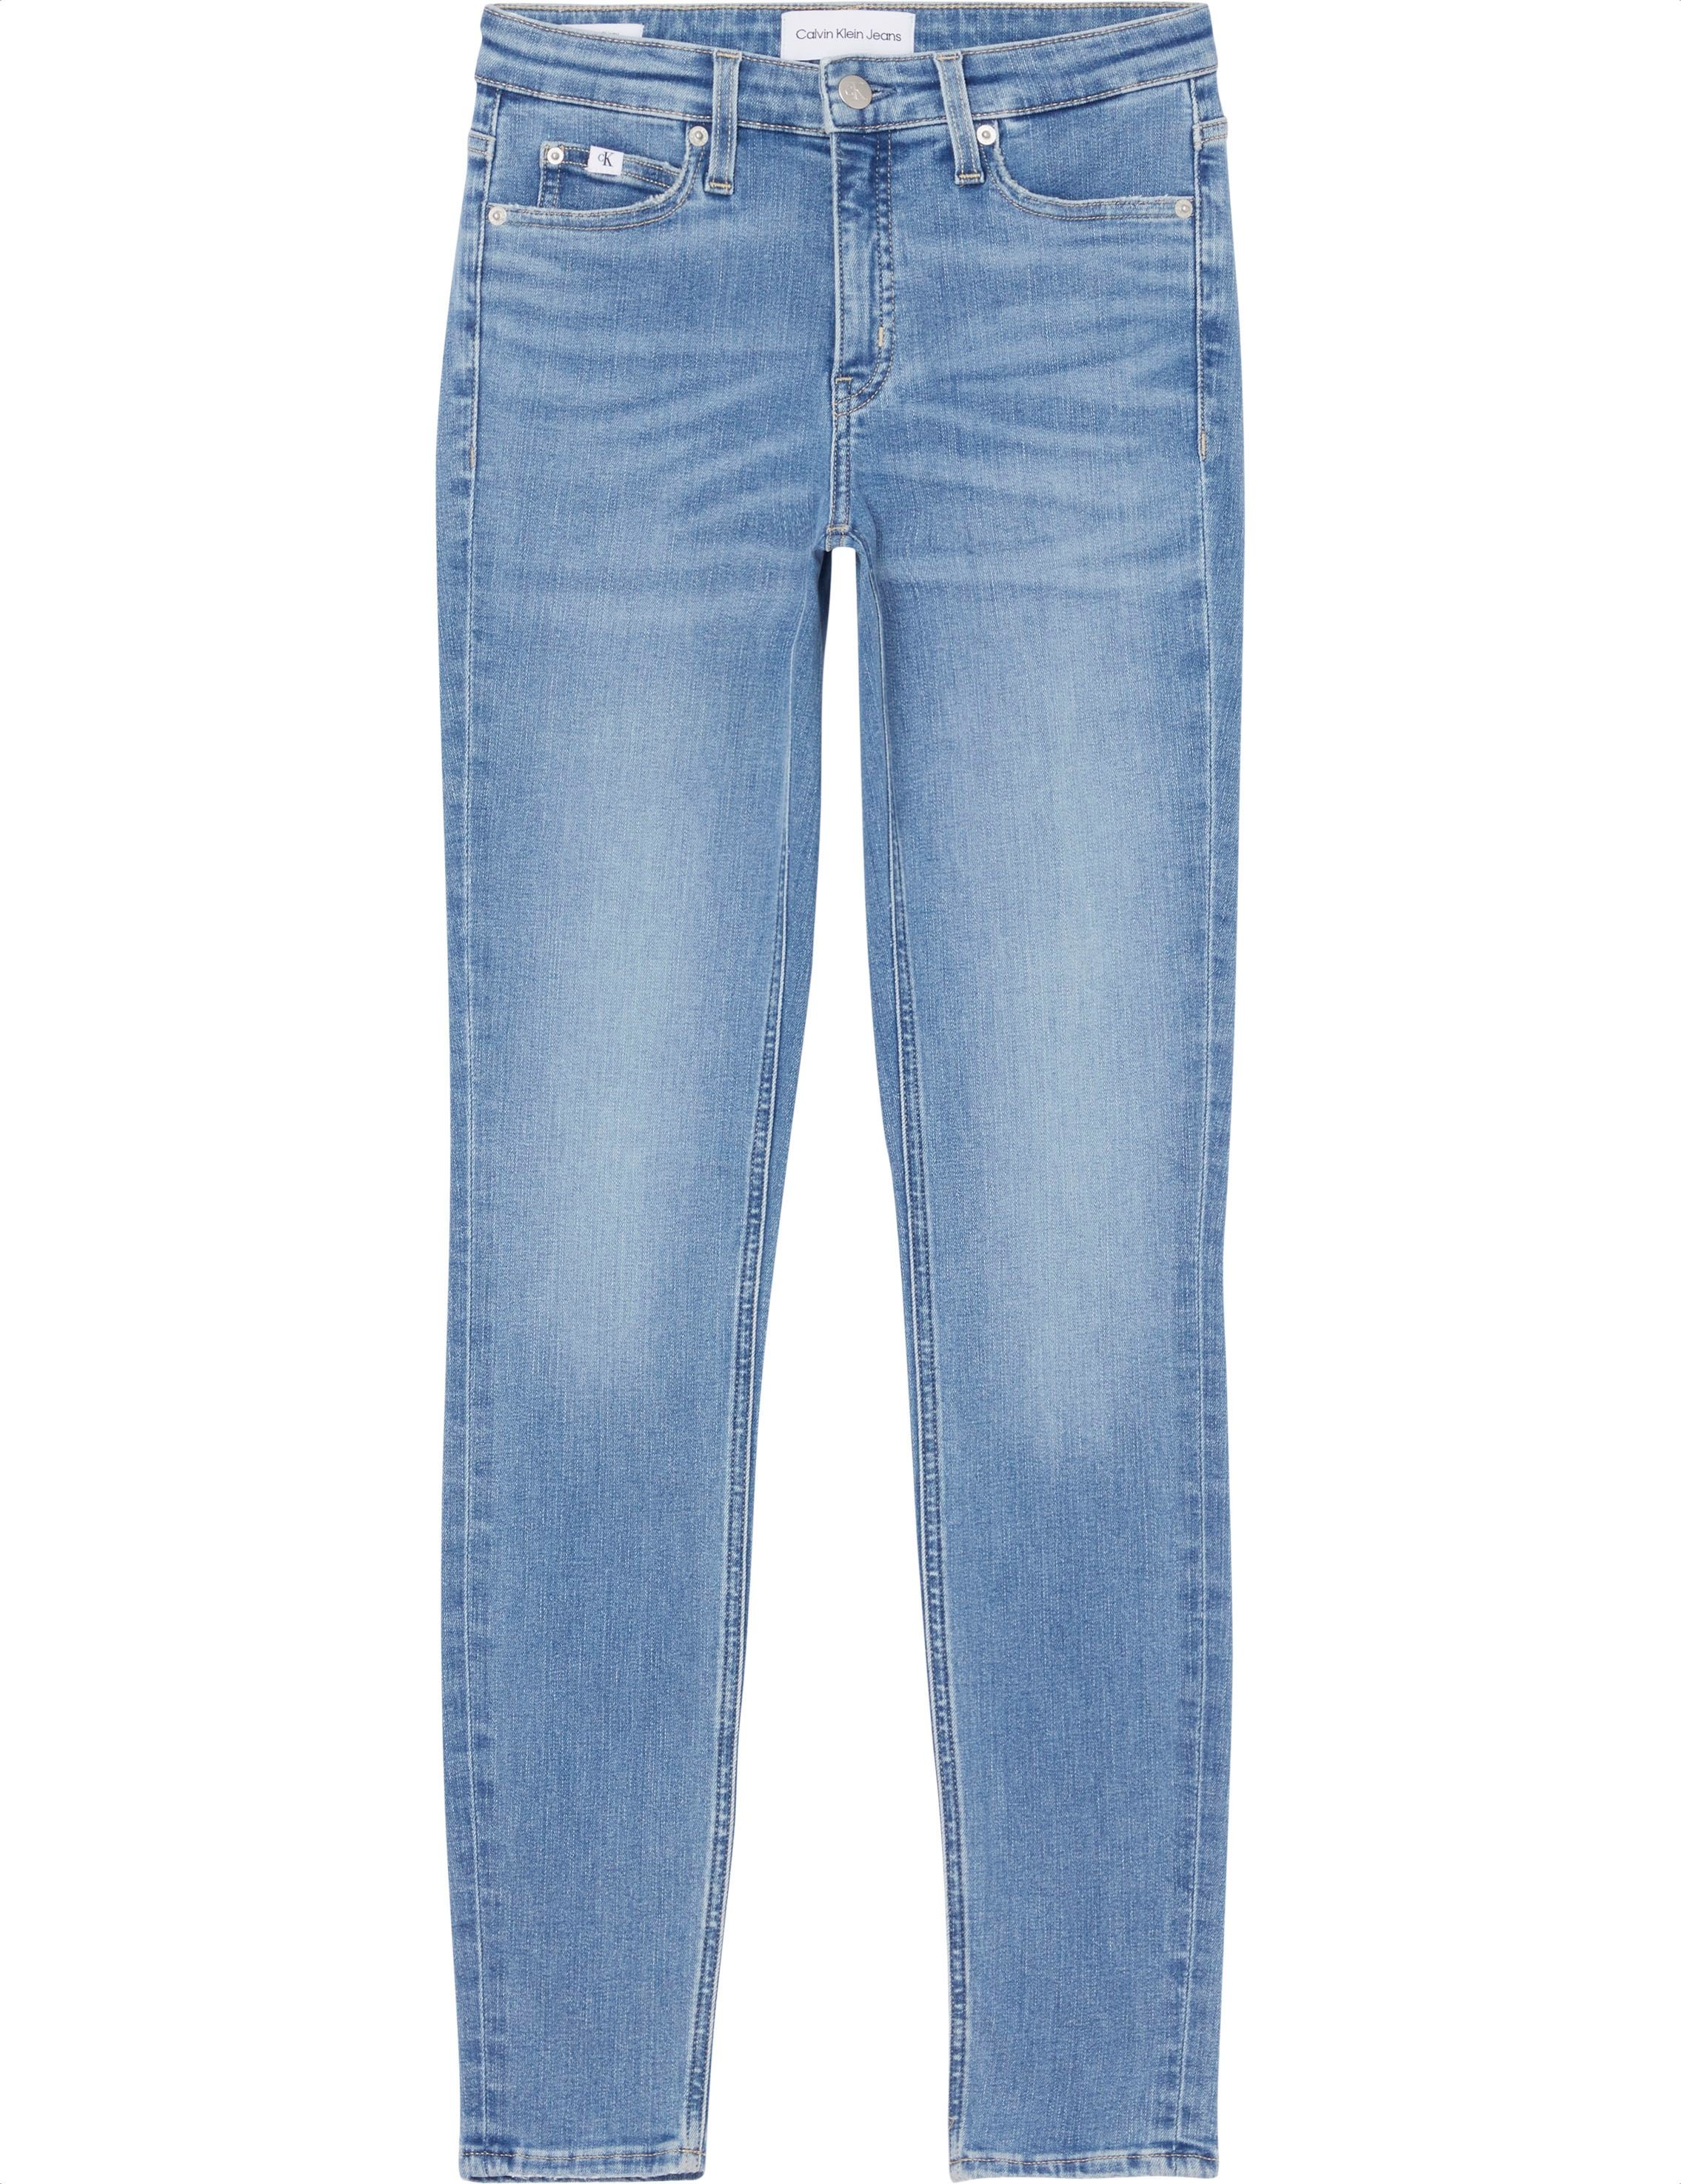 Calvin Klein online Skinny-fit-Jeans, 5-Pocket-Style im bei OTTO Jeans